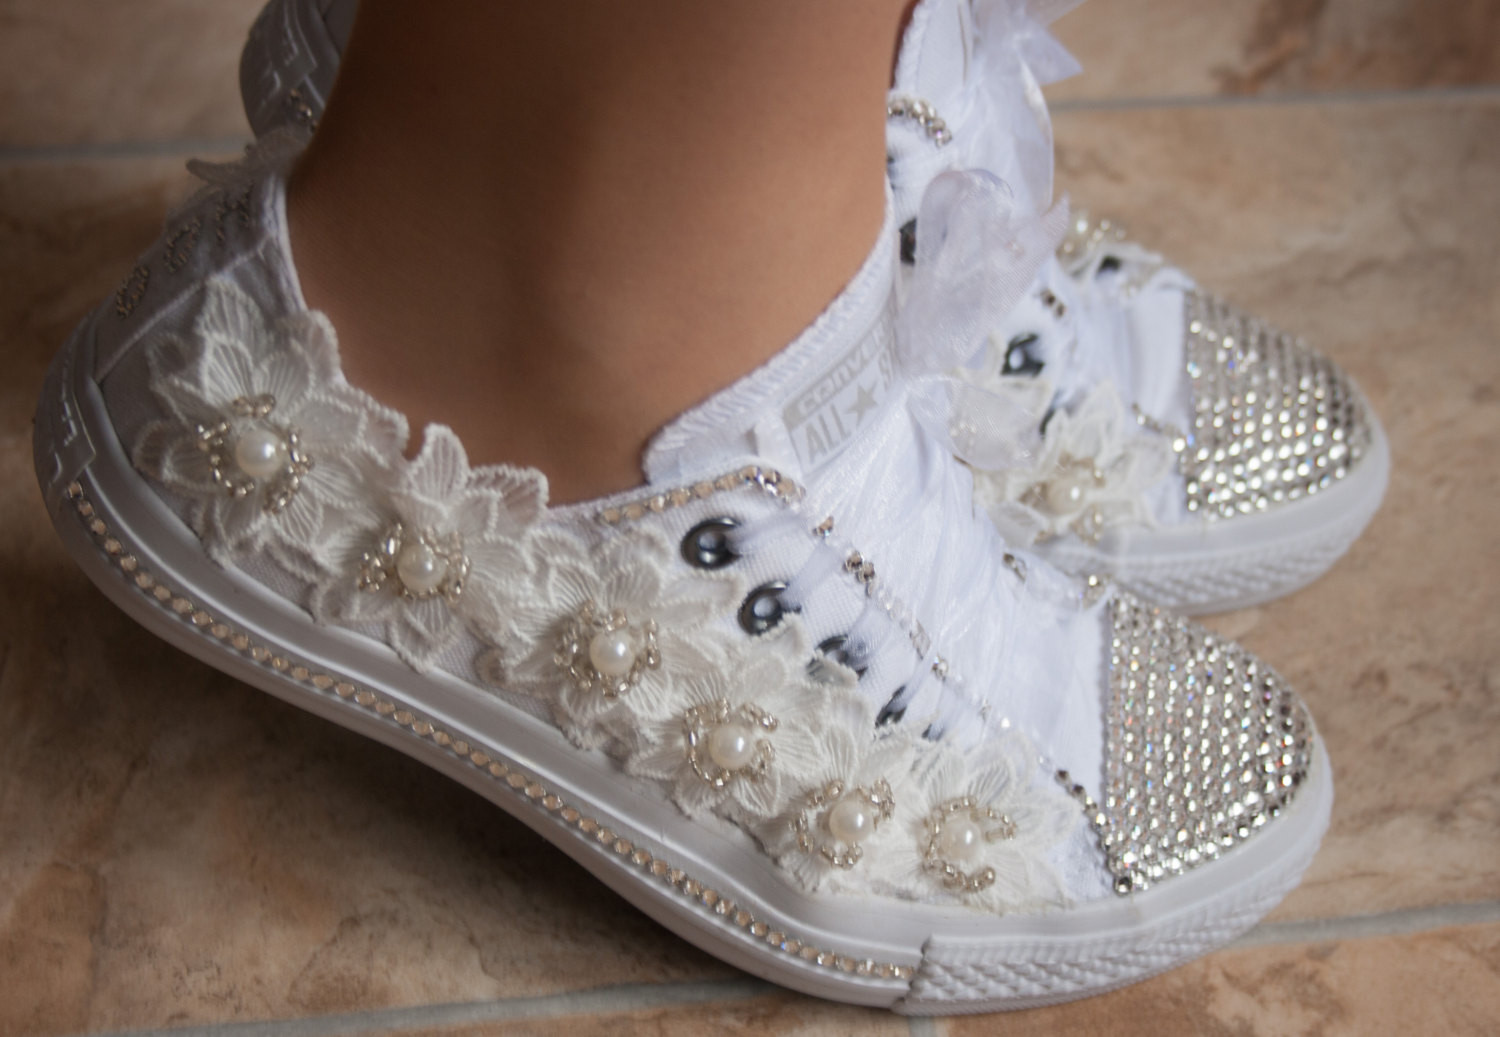 Wedding Converse Shoes
 wedding converse trainers with crystals lace & pearls